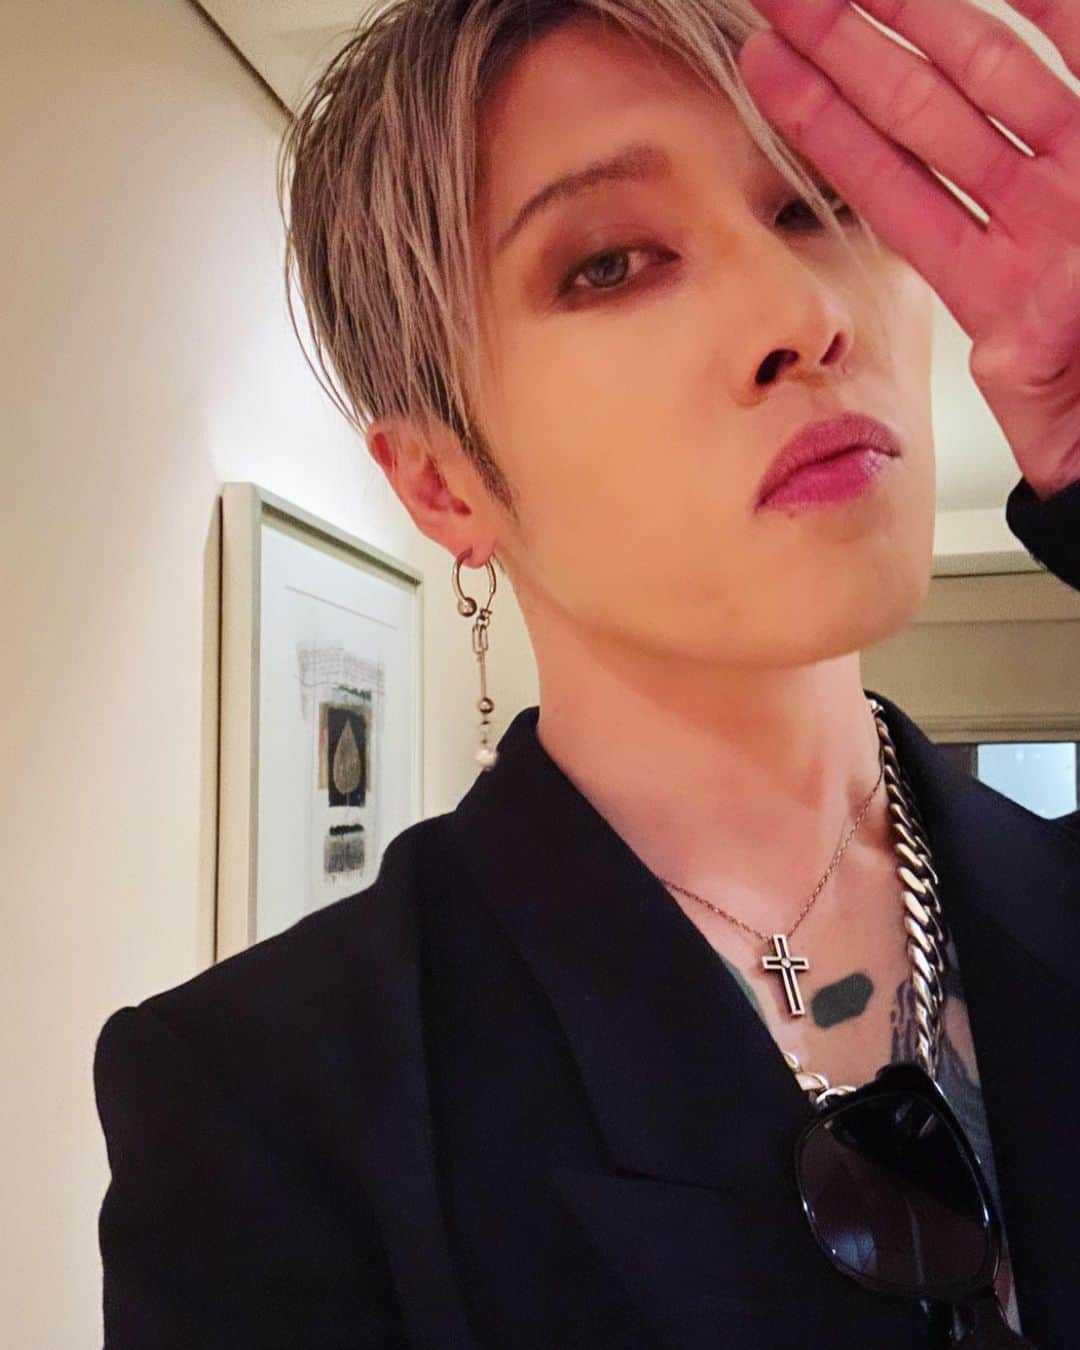 雅-MIYAVI-さんのインスタグラム写真 - (雅-MIYAVI-Instagram)「Brazil show day 🇧🇷  I was completely out of breath after the first few tracks… haha  Tho we had some technical issues, none of those were able to stop us from rocking out. We became one, connected by the music. Hope you all enjoyed the show.   Onstage, I exist solely for you. I pour my heart and soul into every performance, every second, no matter what happens.  Hope to return to Brazil and neighboring countries all across South America soon . - Also a big shout out to my amazing Co-myvz from Chile, Argentina and beyond for coming over too.   Love you all.  Também gostaria de agradecer à fantástica equipe da @followhwstar por essa maravilhosa oportunidade e pelo trabalho árduo.  Espero vê-los novamente em breve. Amo vocês.  ガチライヴ、久々すぎてバテた。  笑  今回も機材ふくめ色々トラブルあったけど、もはやあんま関係なくなってきたよね。その瞬間にできる全てのことを全力で全うする。それ以外にない。  ステージの上で、僕はオーディエンスのみんなのために存在する。自分の持つ全てを捧げる。それのみ。  最近、アコースティックふくめステージ演奏するたびに、やっぱステージで演奏するのは楽しいなあ、もっとライヴしてみんなと踊って叫んで一つになりたいなあと、心底感じてるよ。  いつも愛と気合いをありがとう 地球の裏側まで届きました  🫡」7月10日 5時29分 - miyavi_ishihara